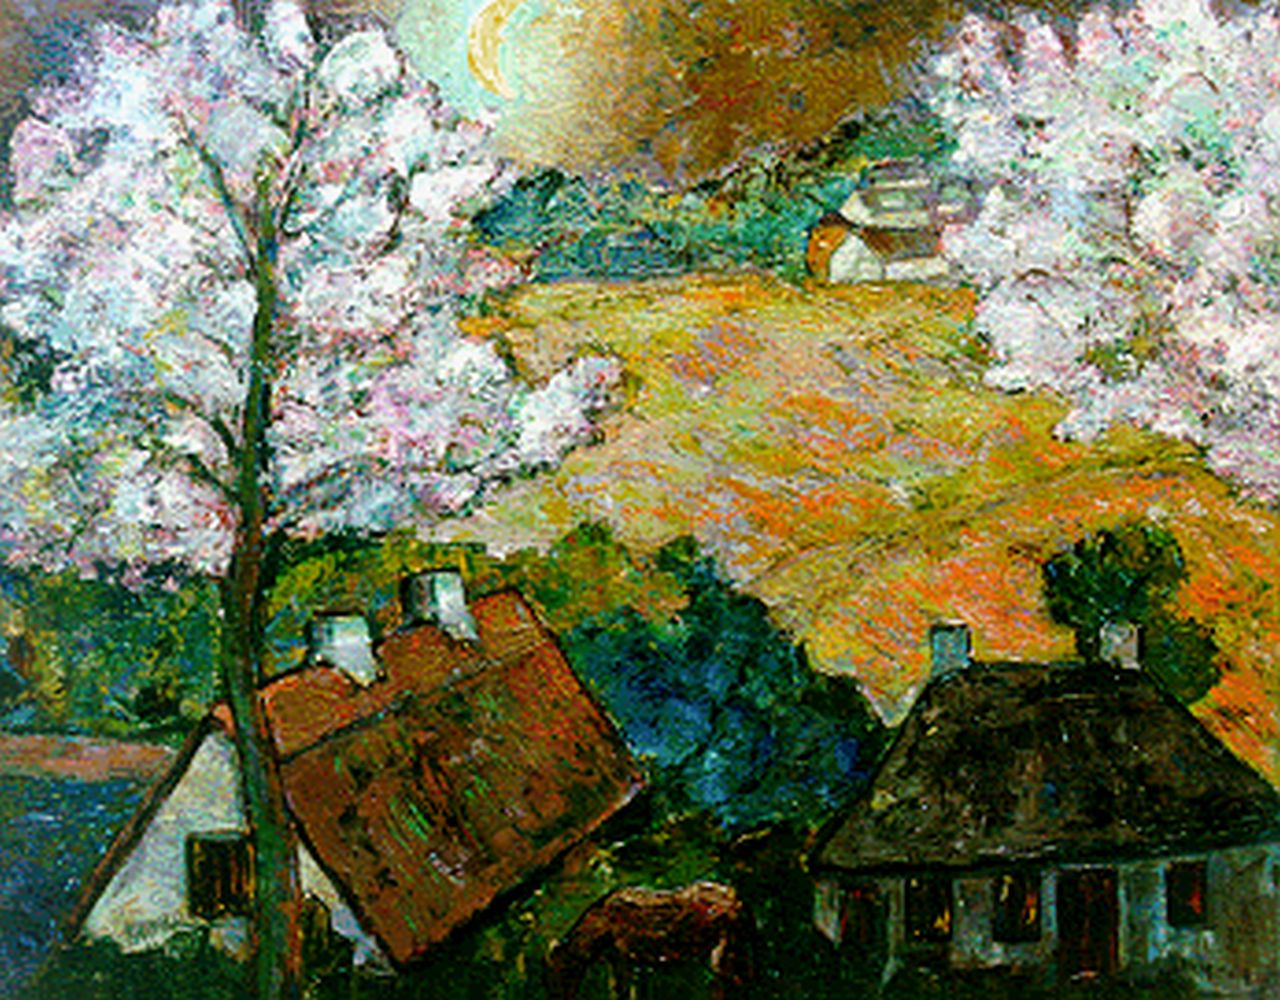 Doeser J.J.  | 'Jacobus' Johannes Doeser, Blossoming trees in a landscape, oil on canvas 79.3 x 100.2 cm, signed l.r.